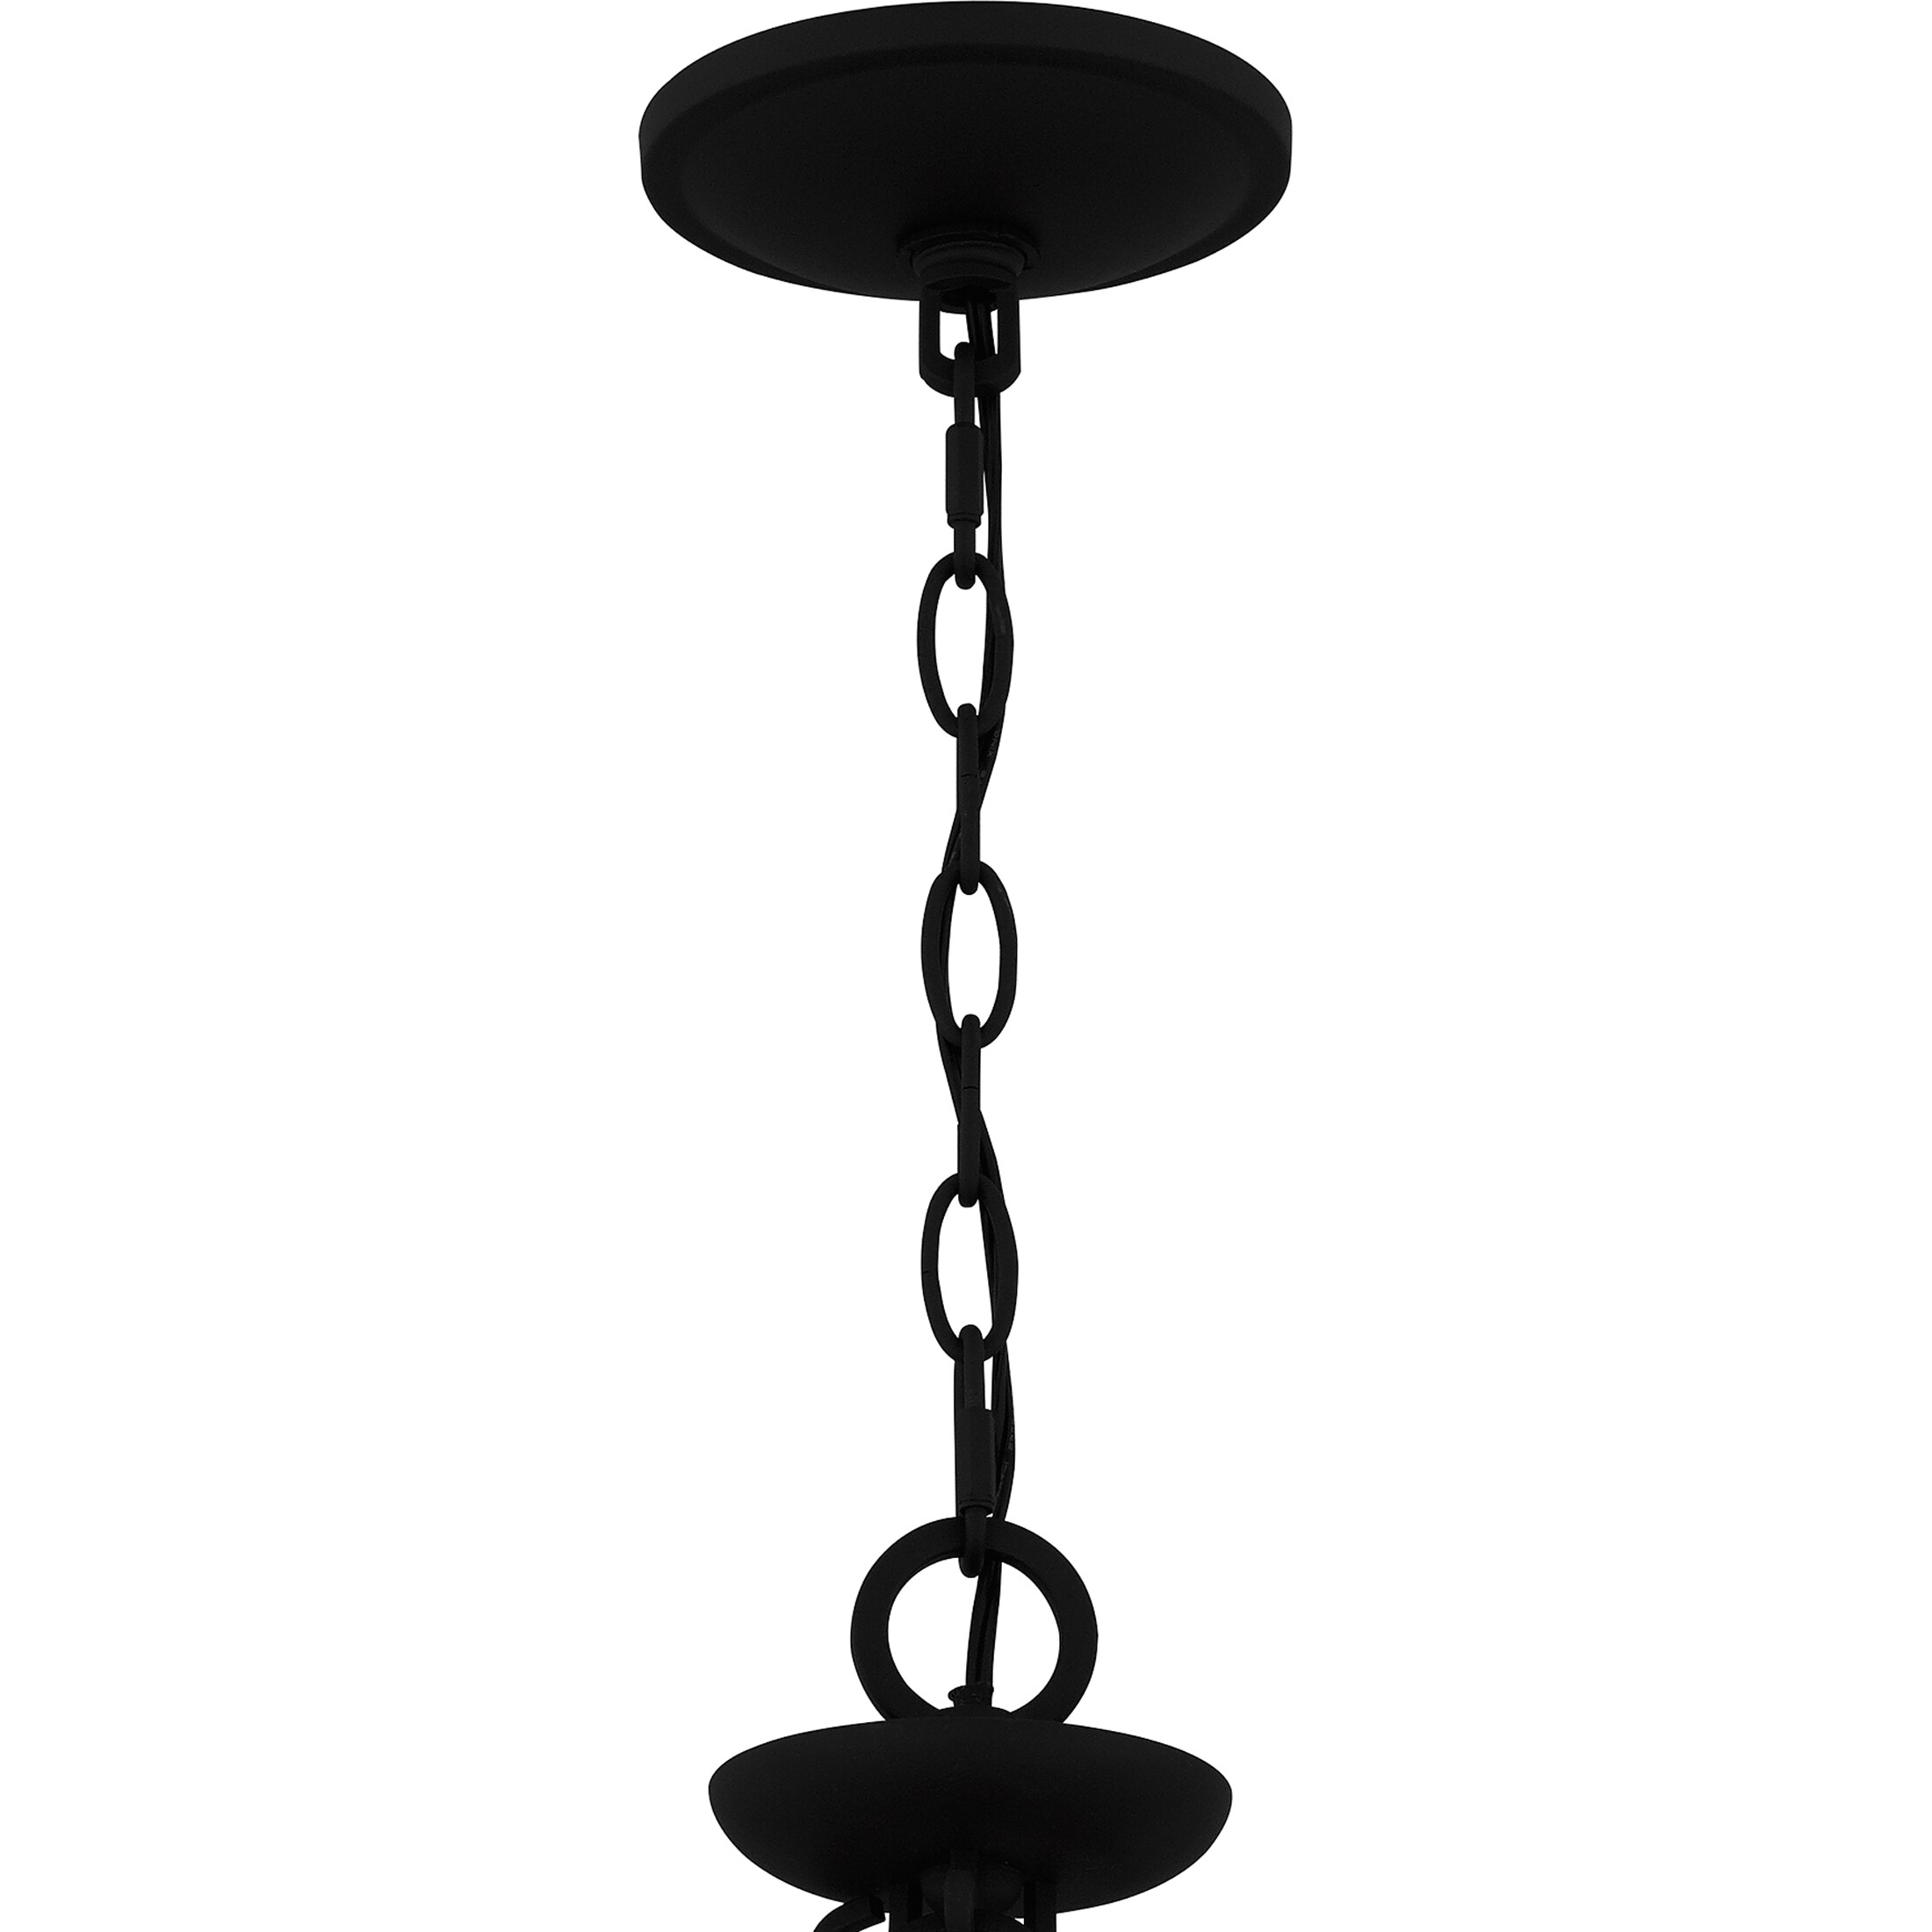 Quoizel Octavia 9-Light Earth Black Traditional Led, Damp Rated 